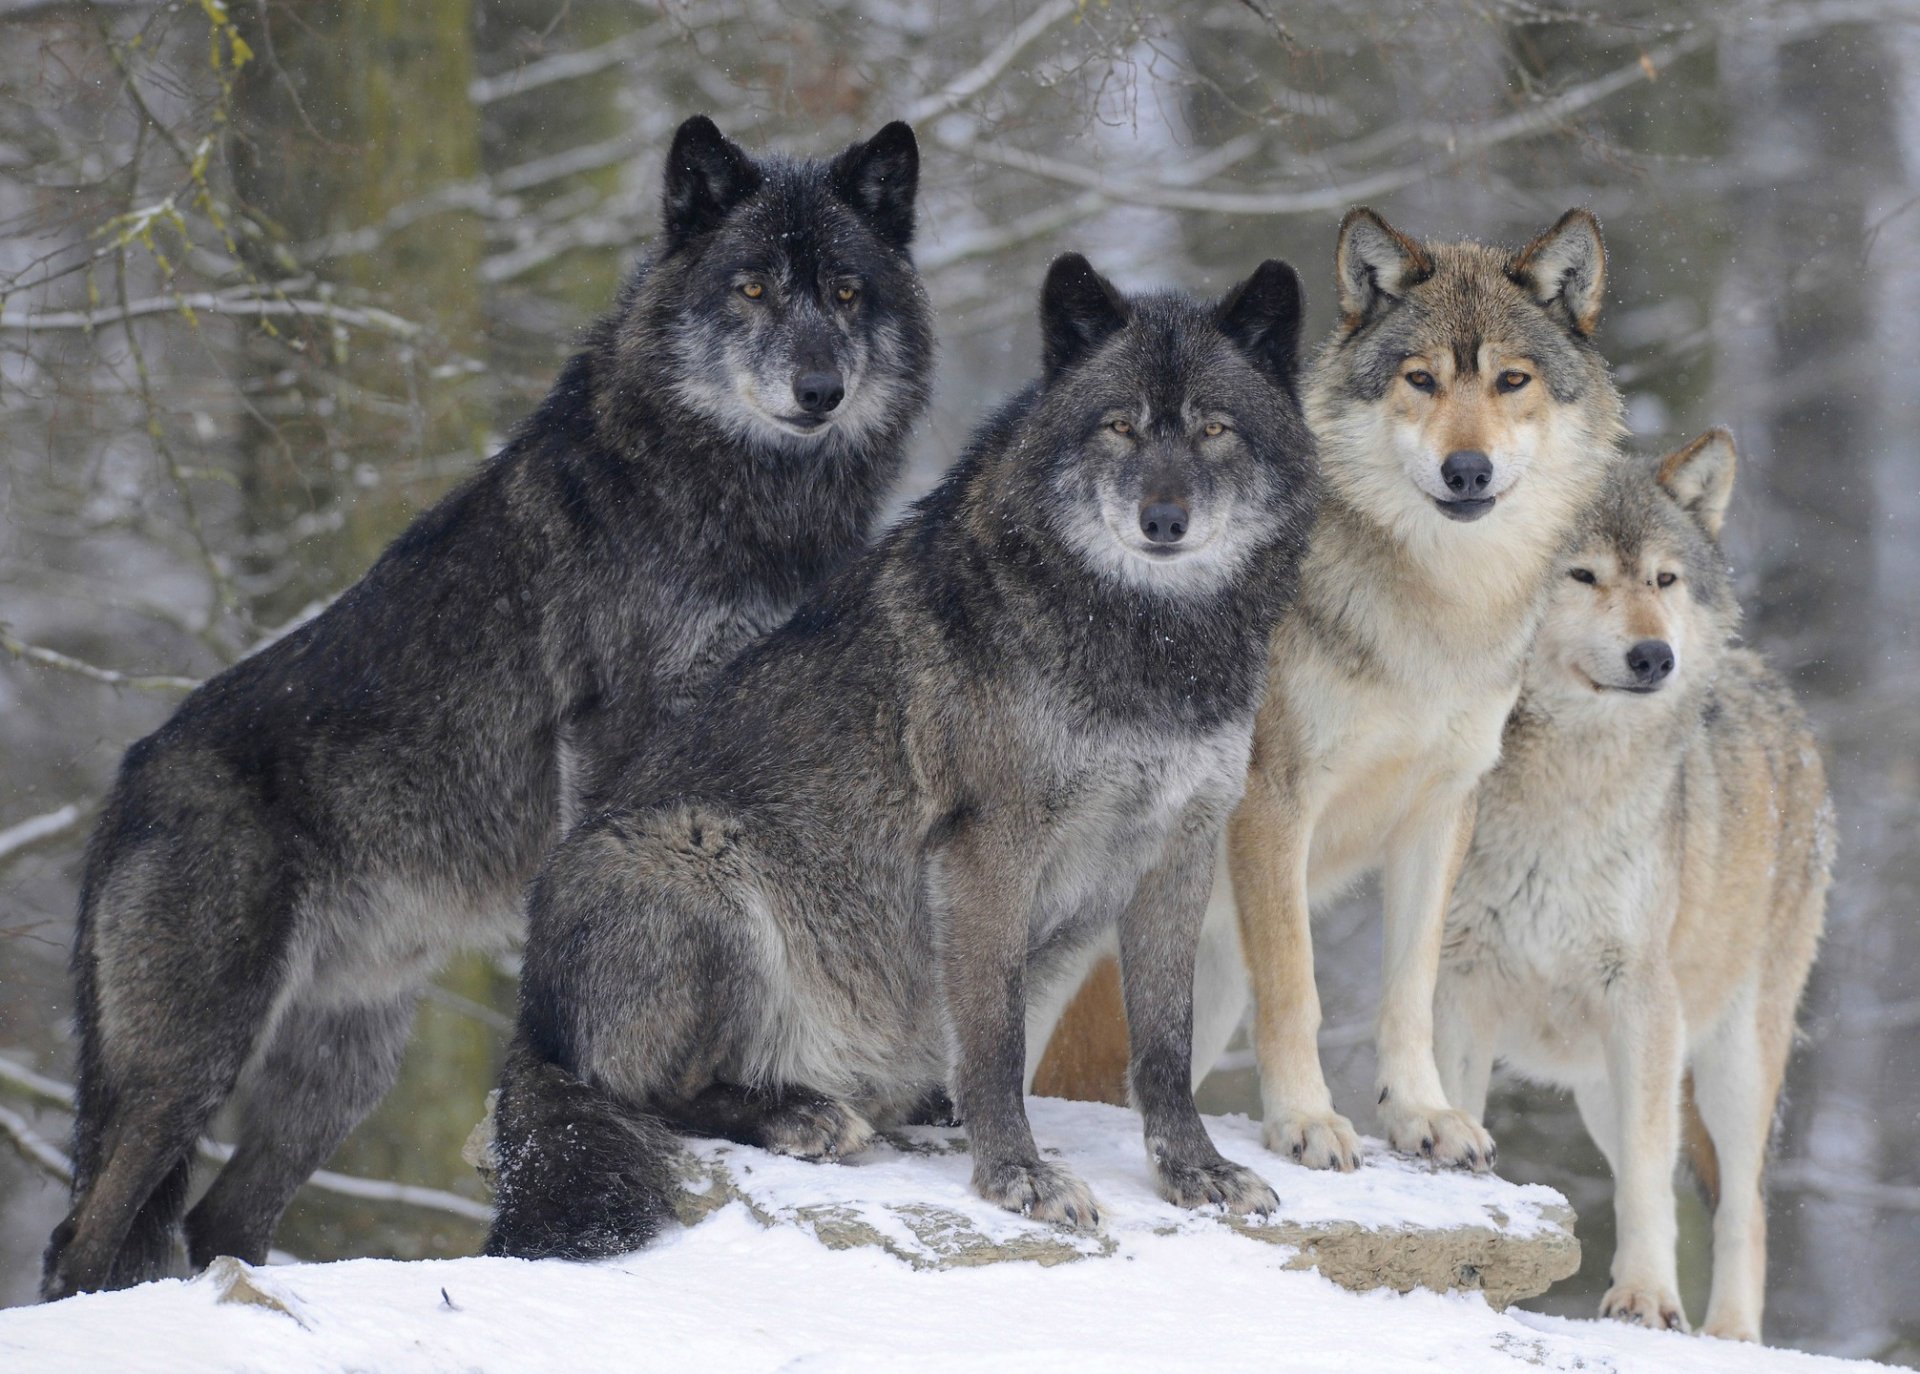 Gray and Black Wolves in Winter Forest HD Wallpaper ...
 New World Black Wolves